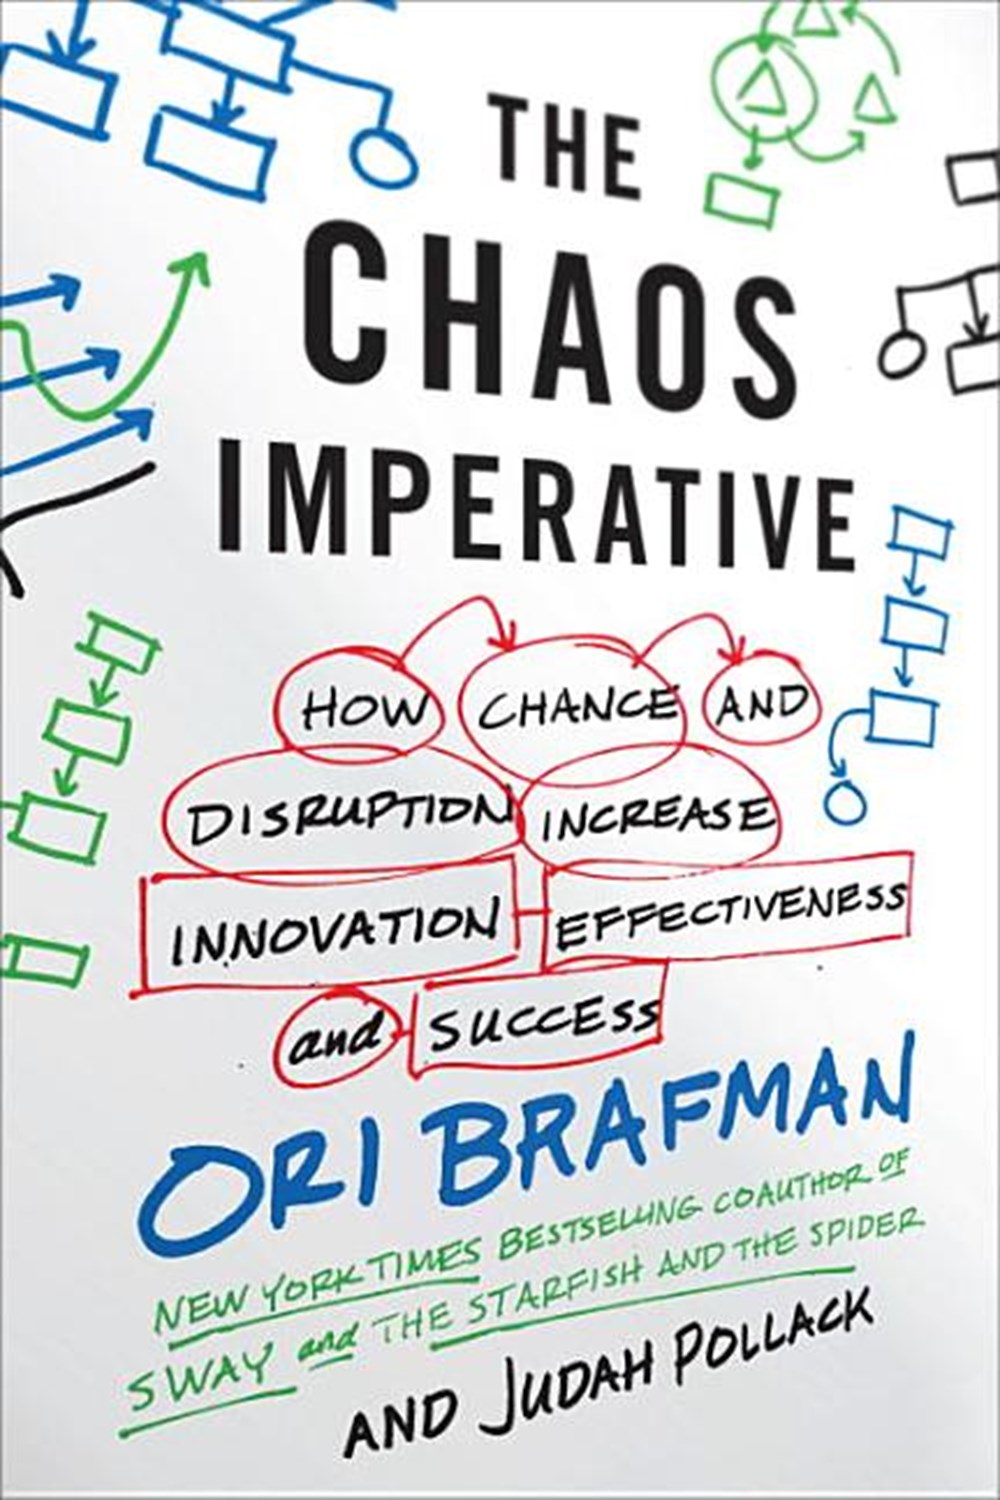 Chaos Imperative How Chance and Disruption Increase Innovation, Effectiveness, and Success